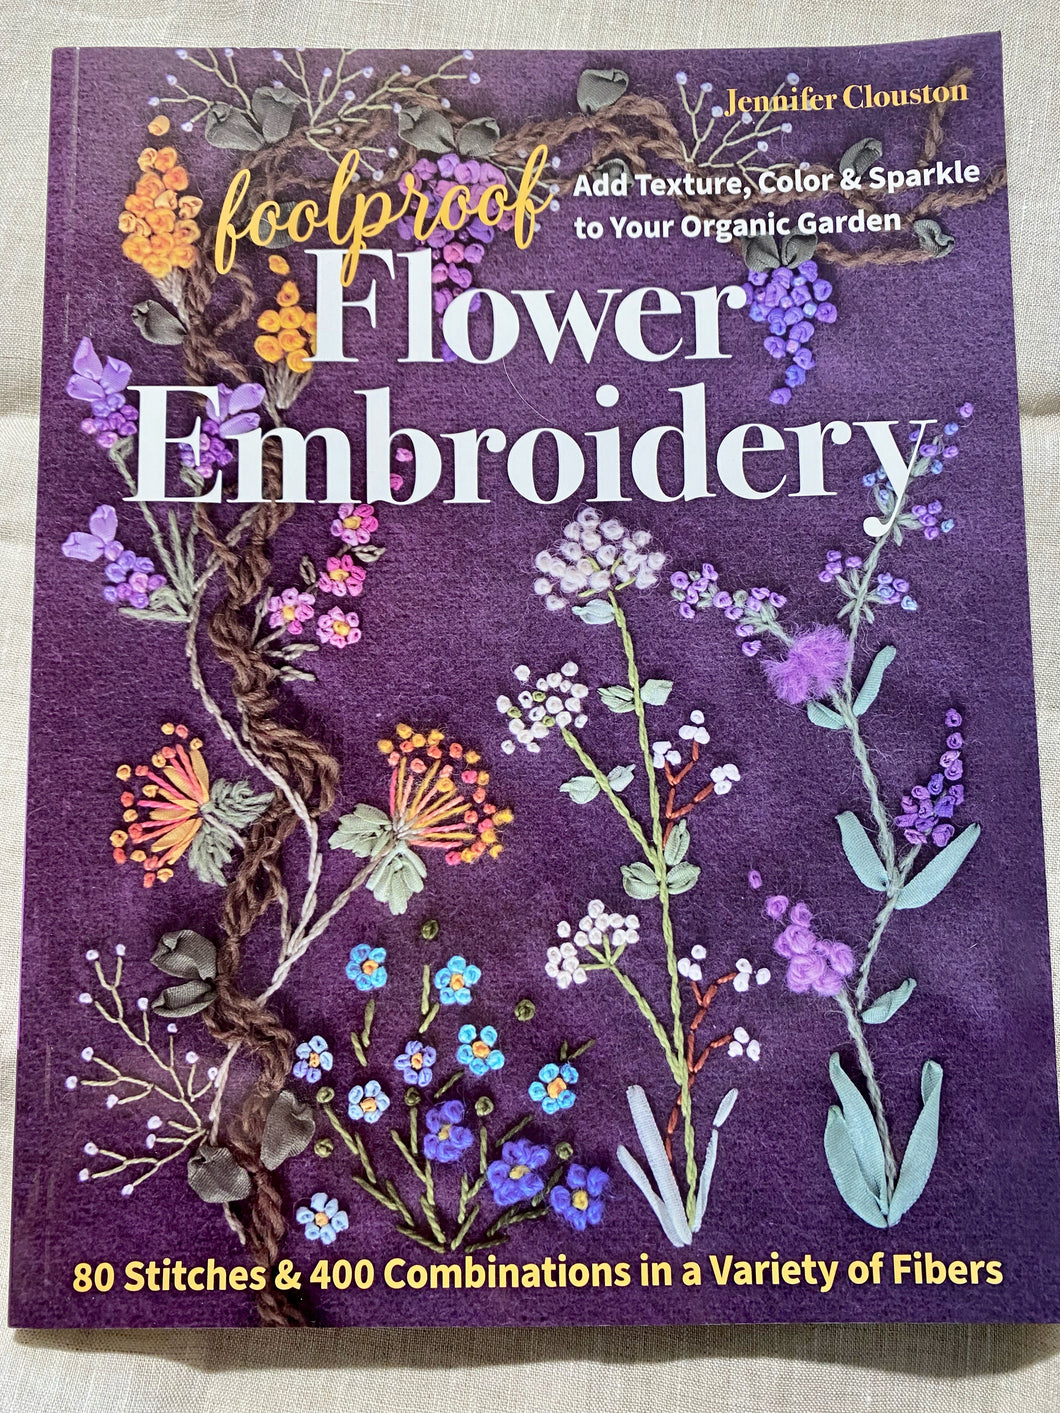 Foolproof Flower Embroidery by Jennifer Clouston